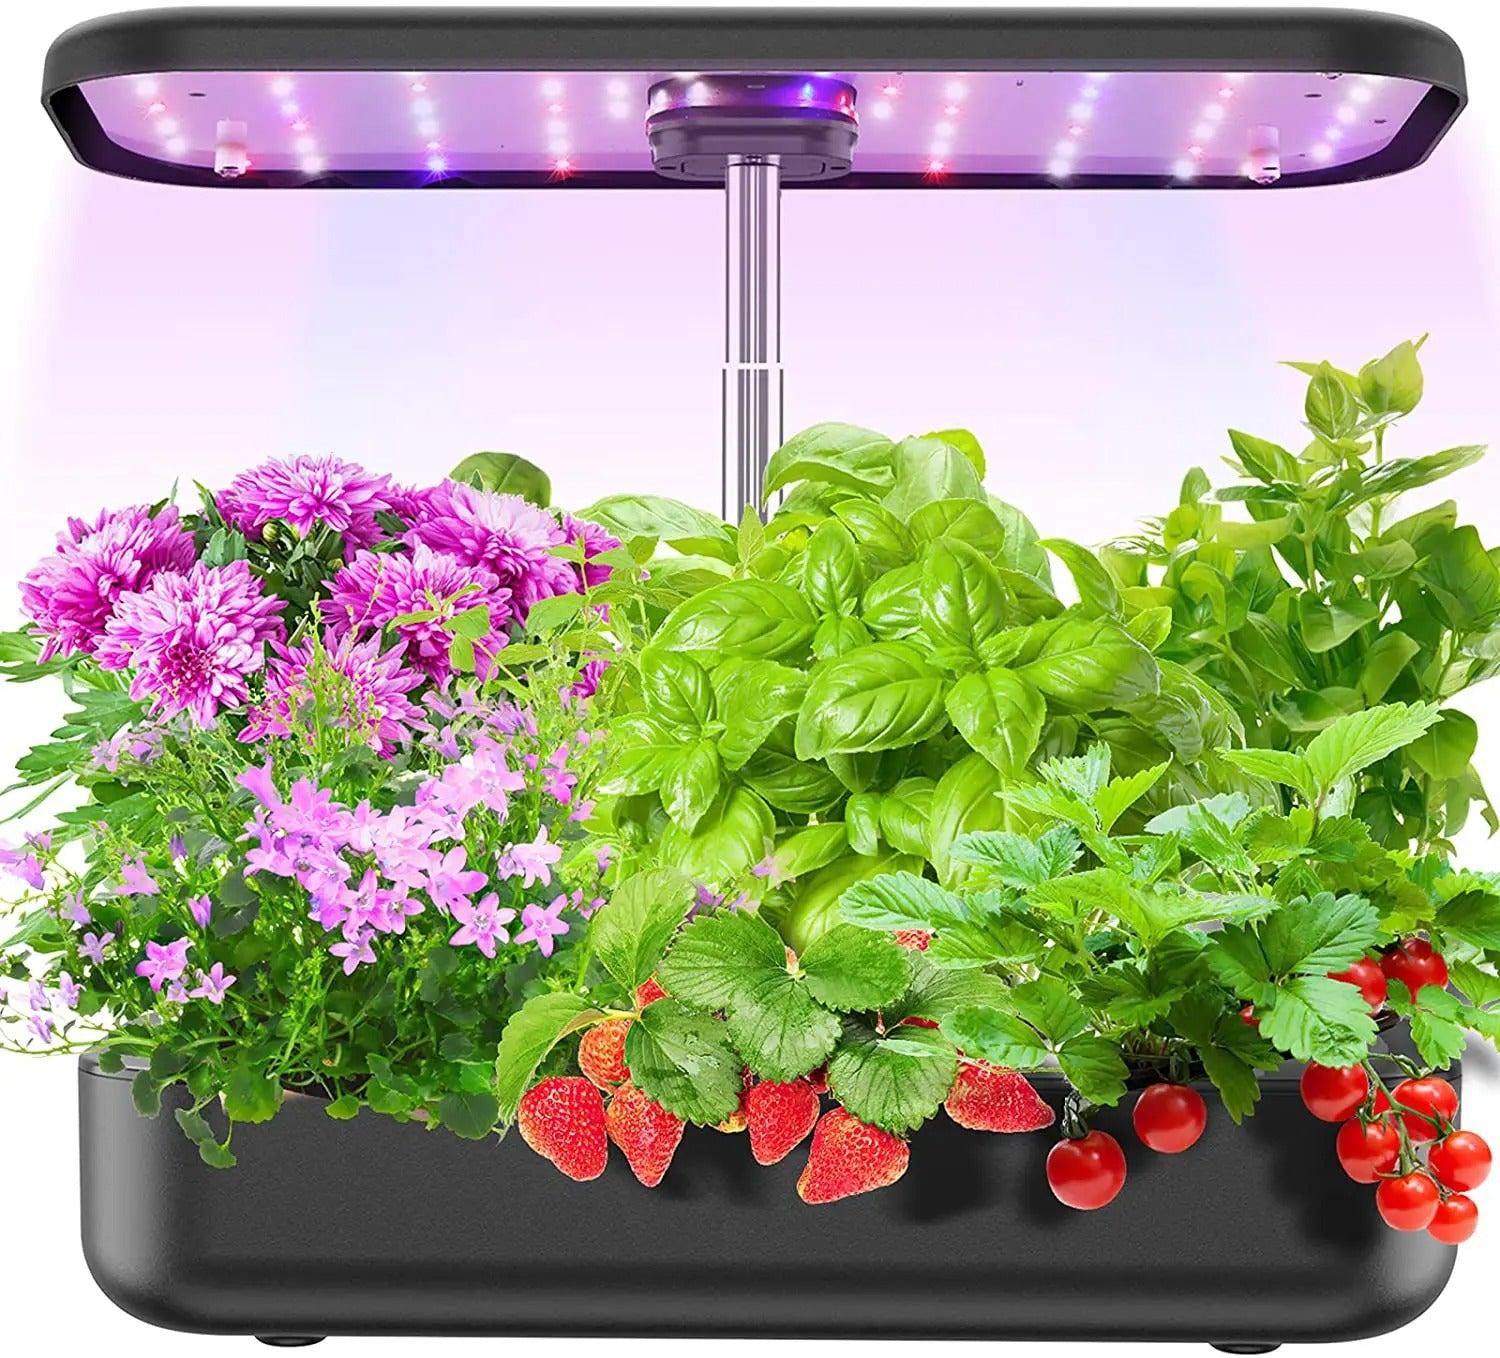 Vegrower H12 Hydroponic Growing System with 12 Pods